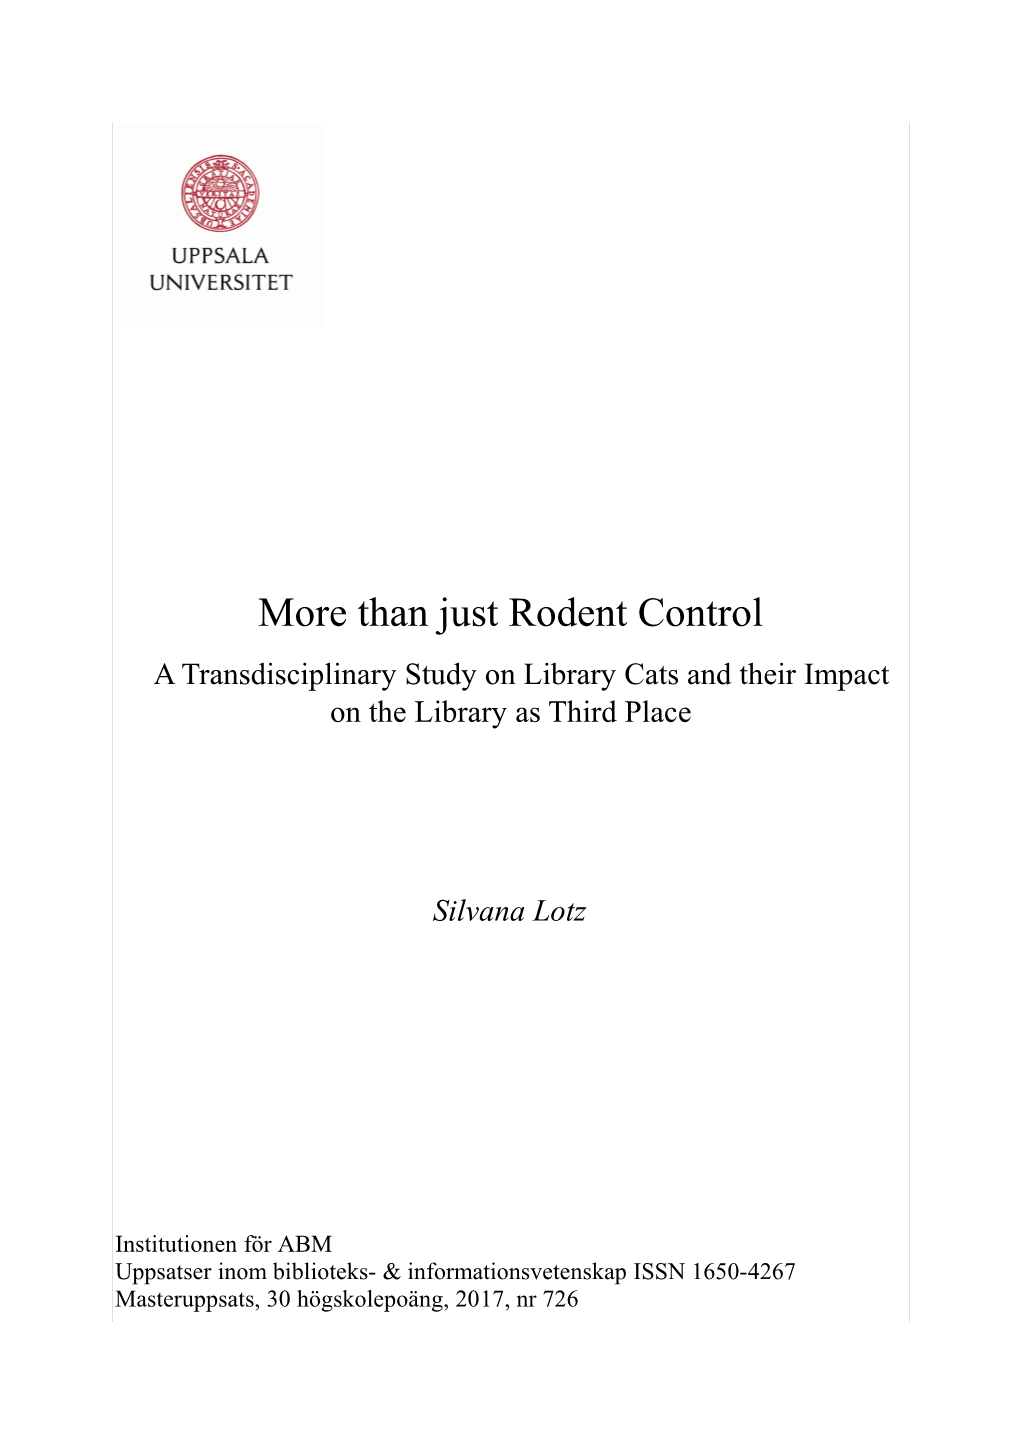 More Than Just Rodent Control a Transdisciplinary Study on Library Cats and Their Impact on the Library As Third Place